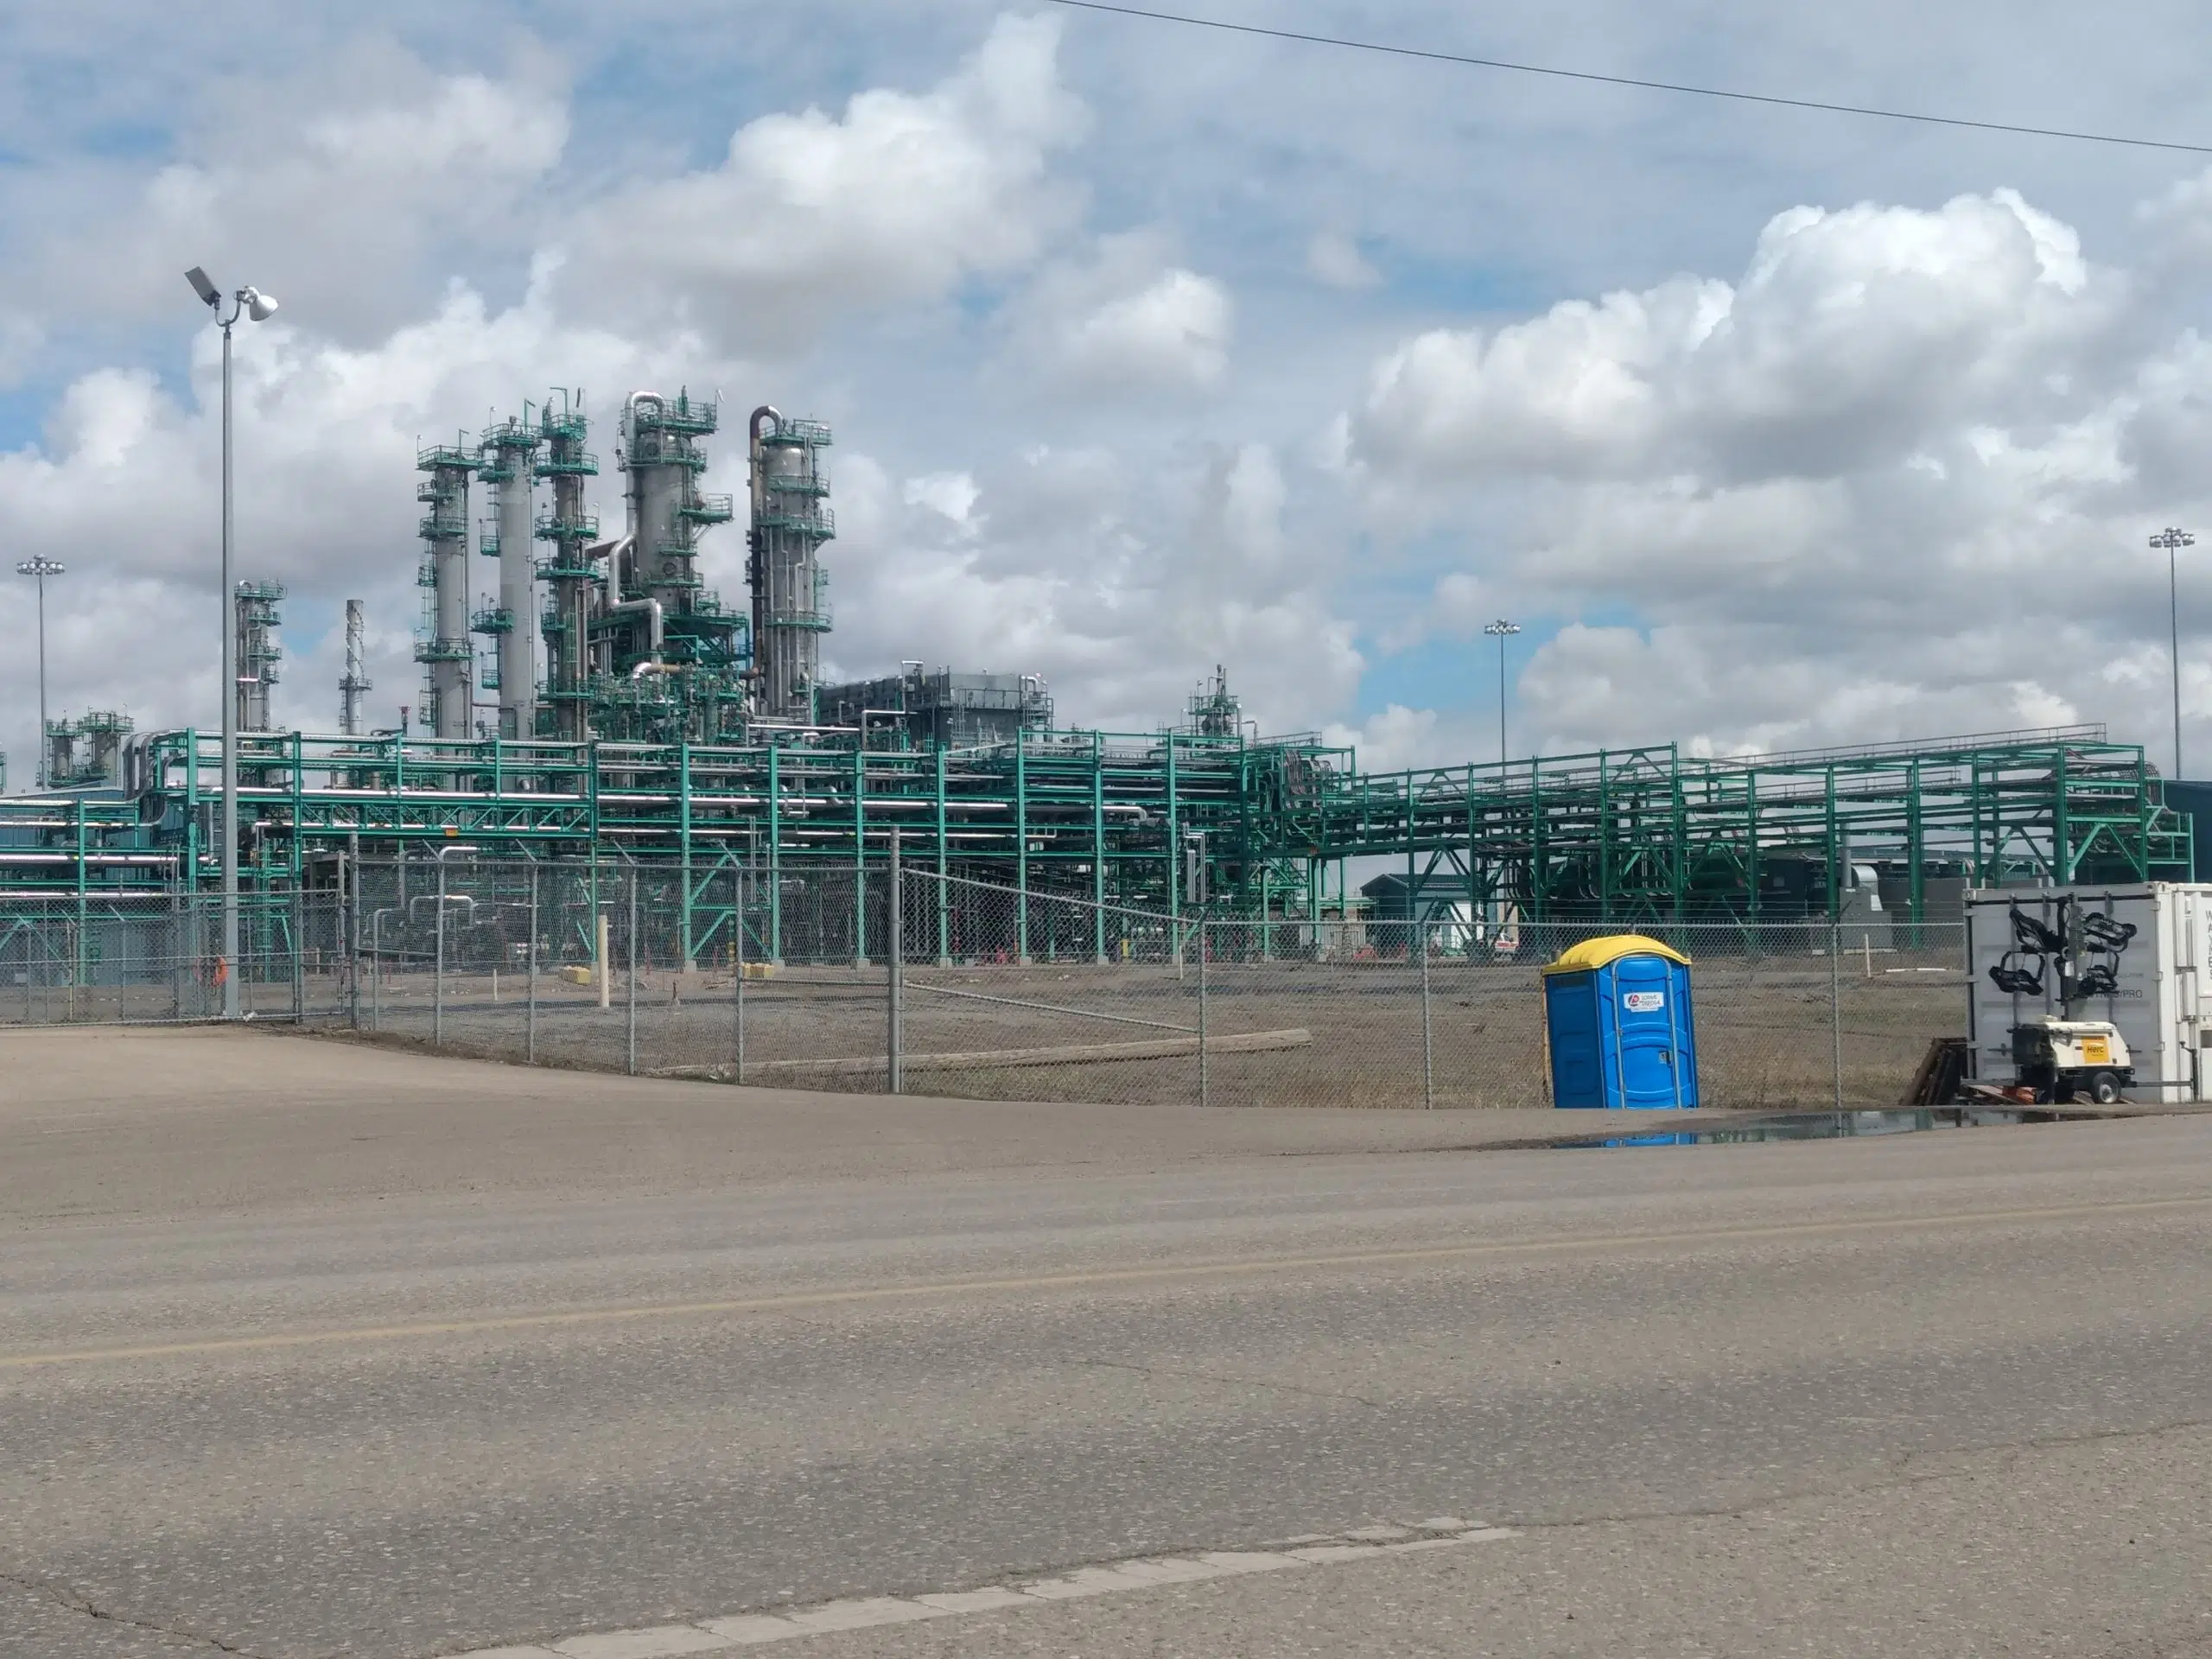 Co-op refinery laying off 100 workers